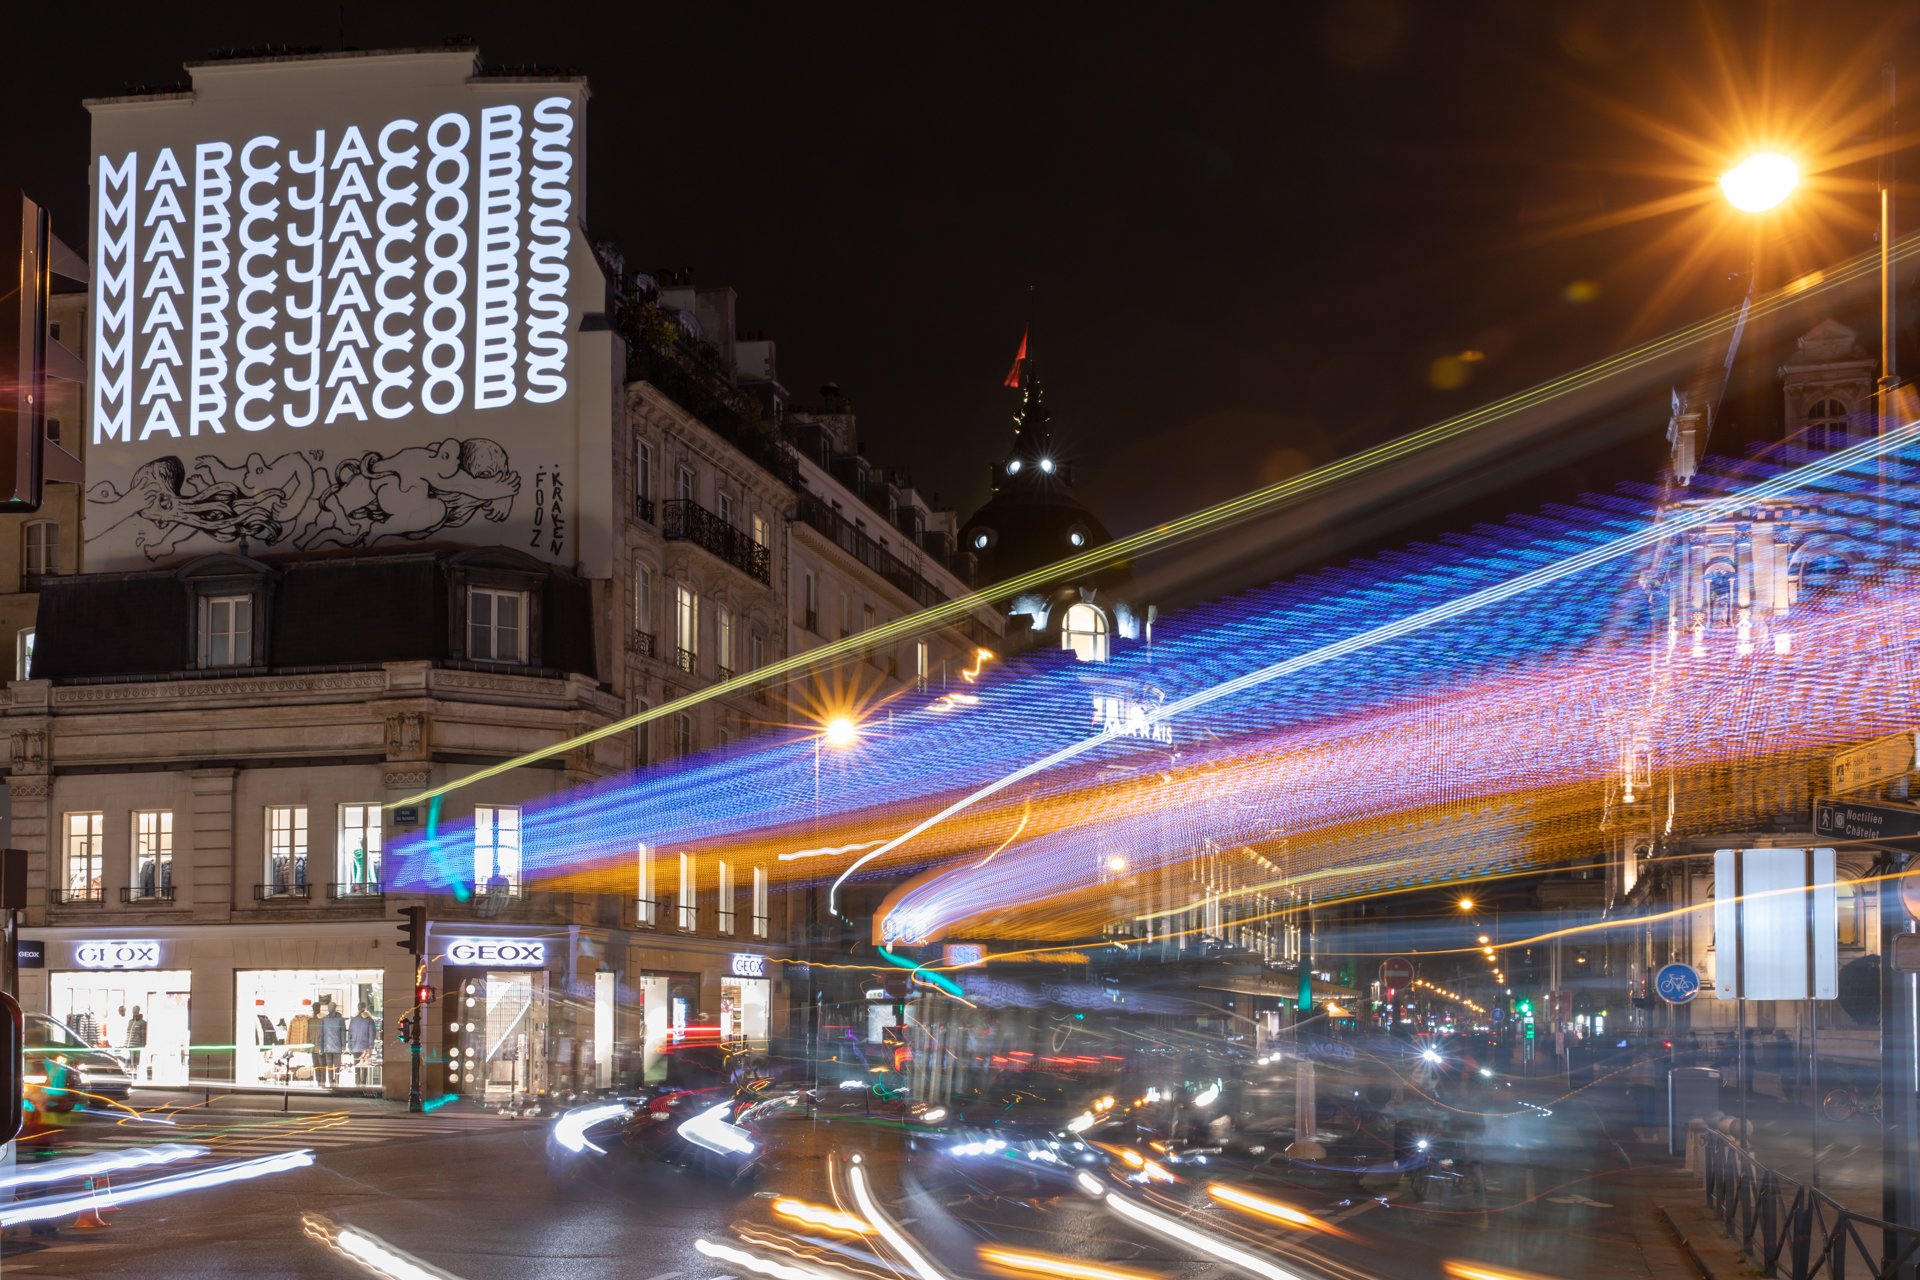 Marc Jacobs Paris By Night January 2022 by Alexis Jacquin @alexisjacq1-201_web.jpg